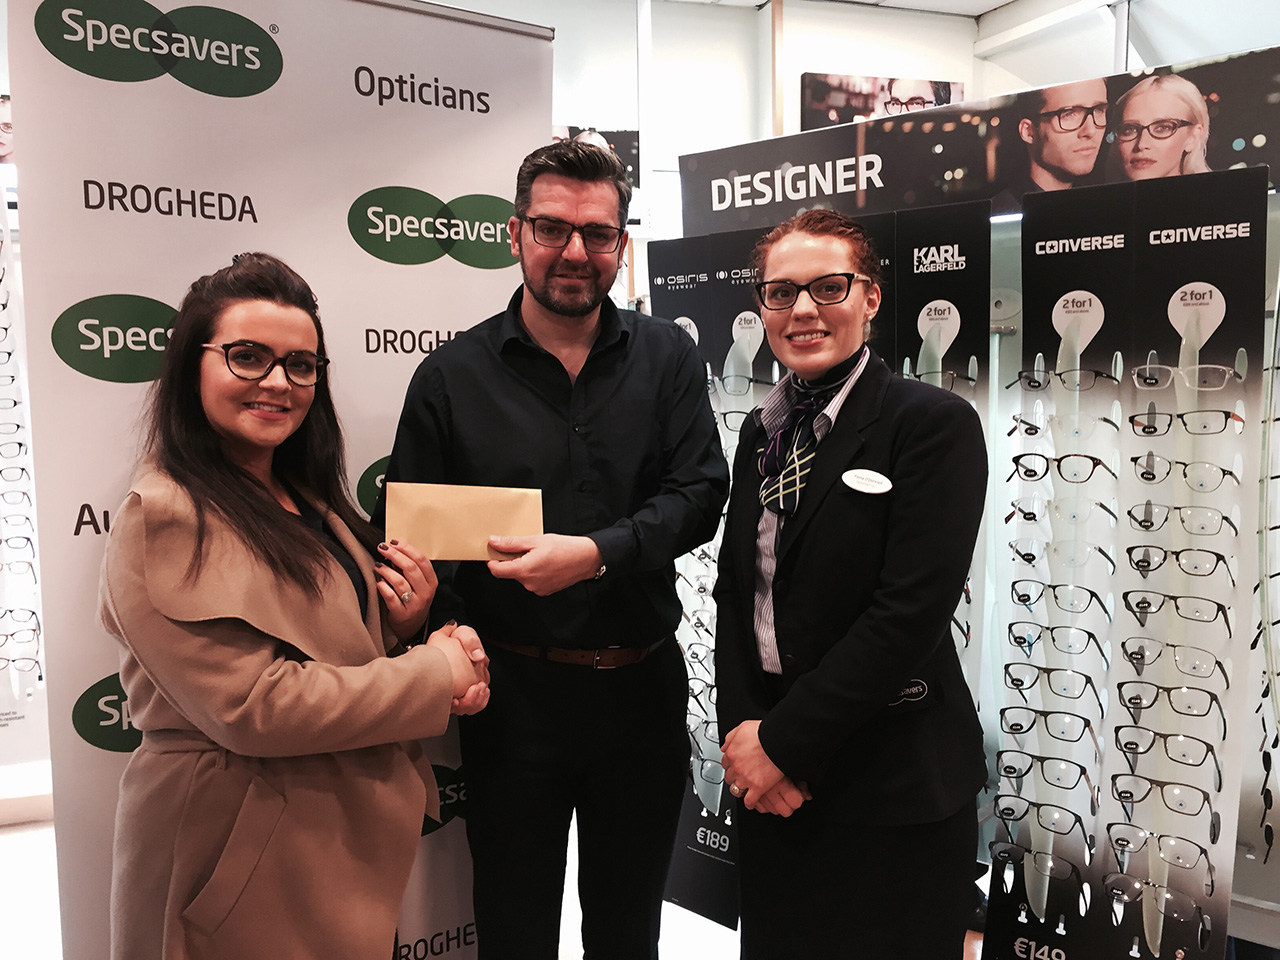 Swoty winner for Specsavers